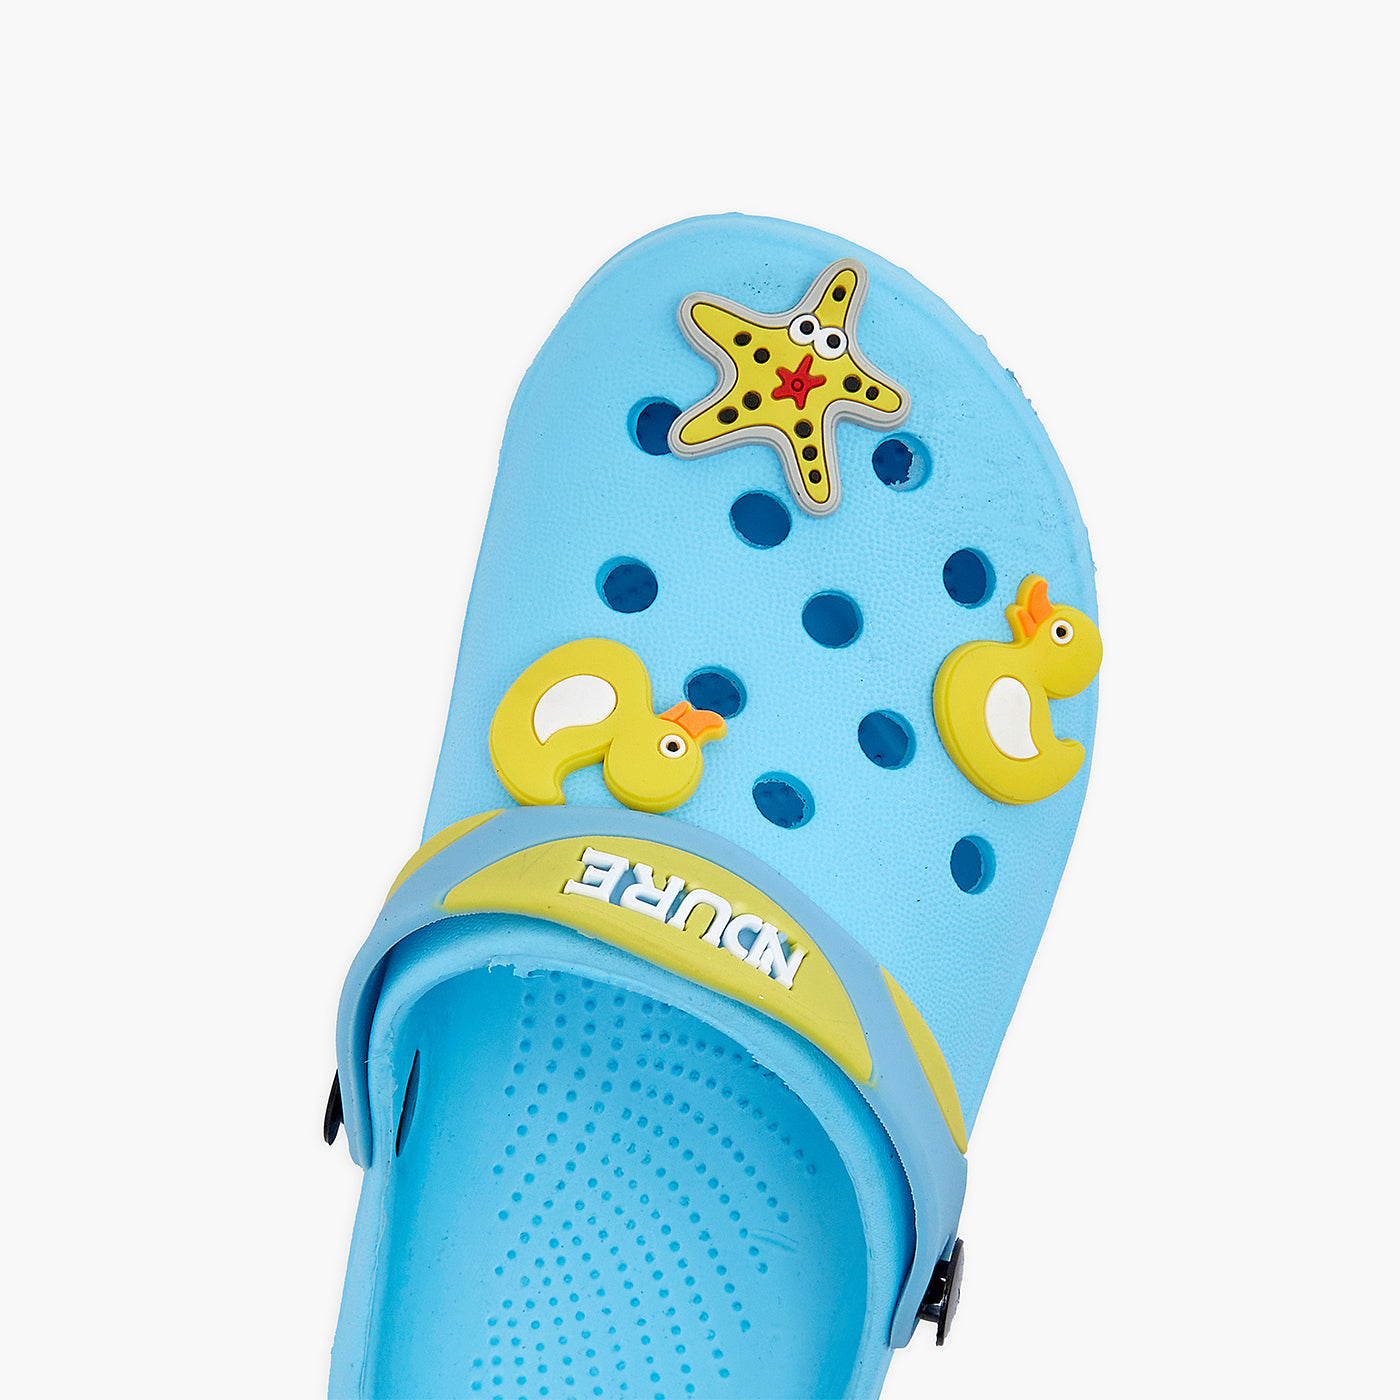 Snazzy Boys Sandals